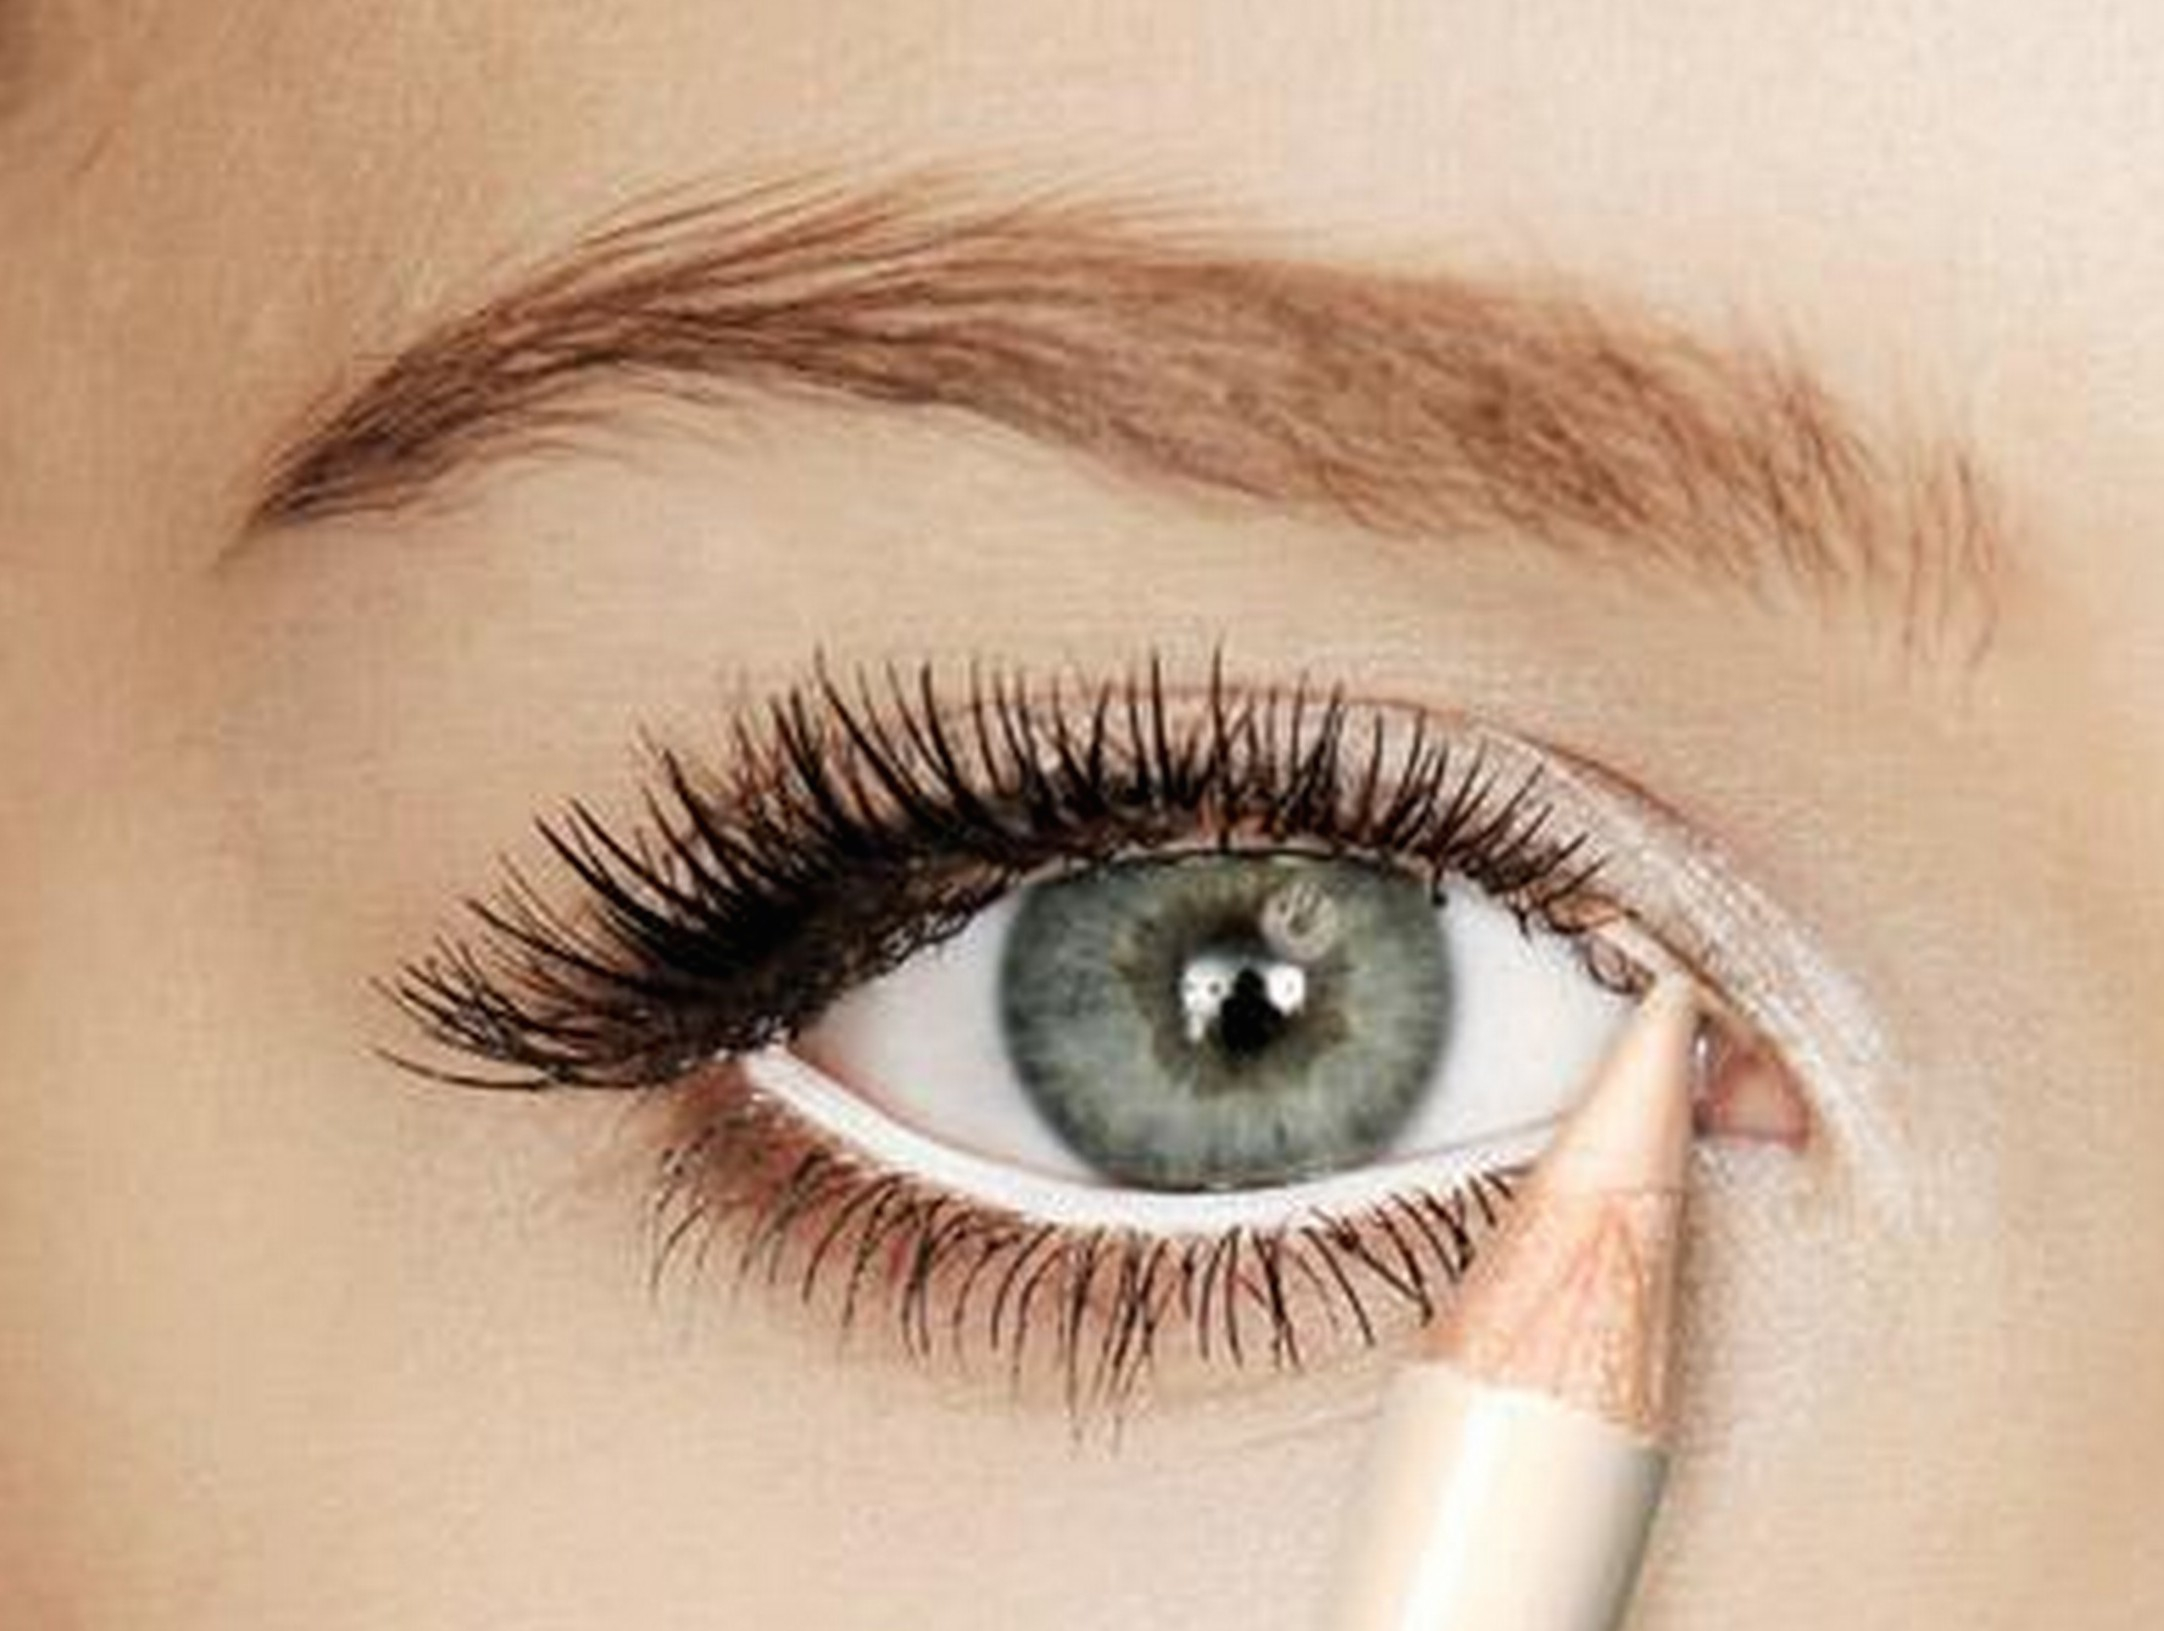 White Makeup Under Eyes 5 Ways To Make Your Eyes Look Much Bigger Huda Beauty Makeup